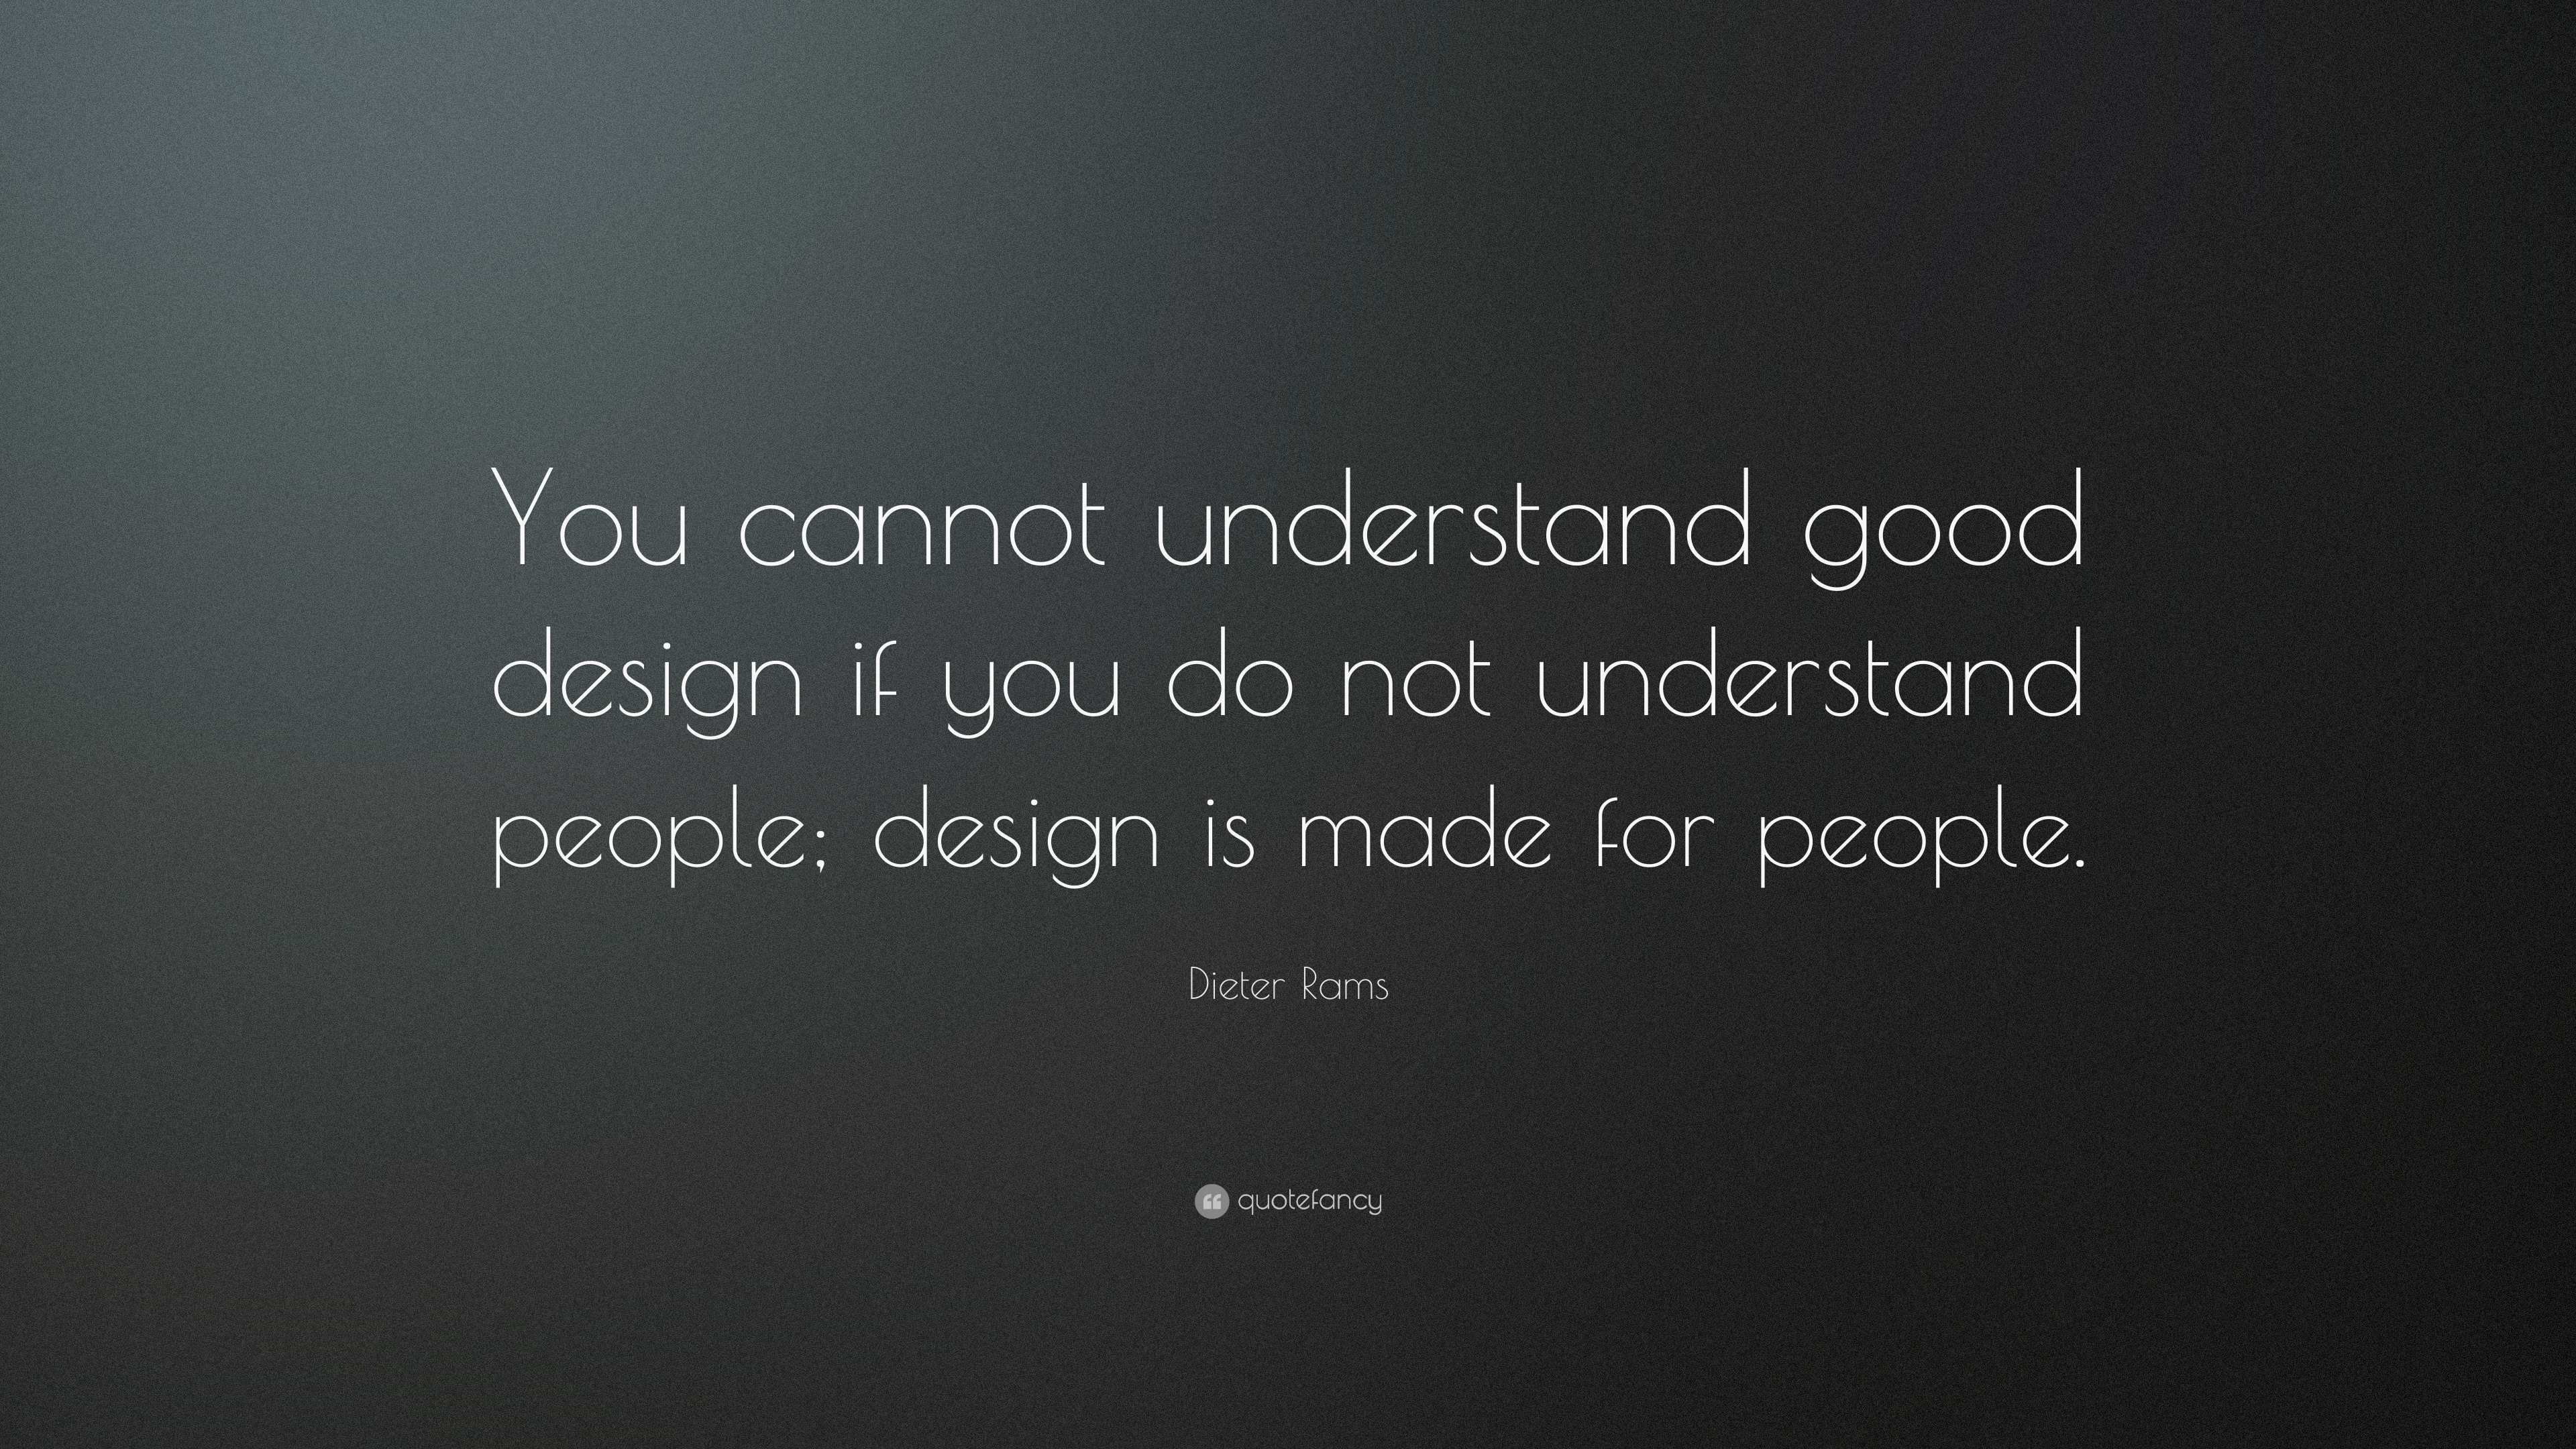 Dieter Rams Quote: “You cannot understand good design if you do not ...